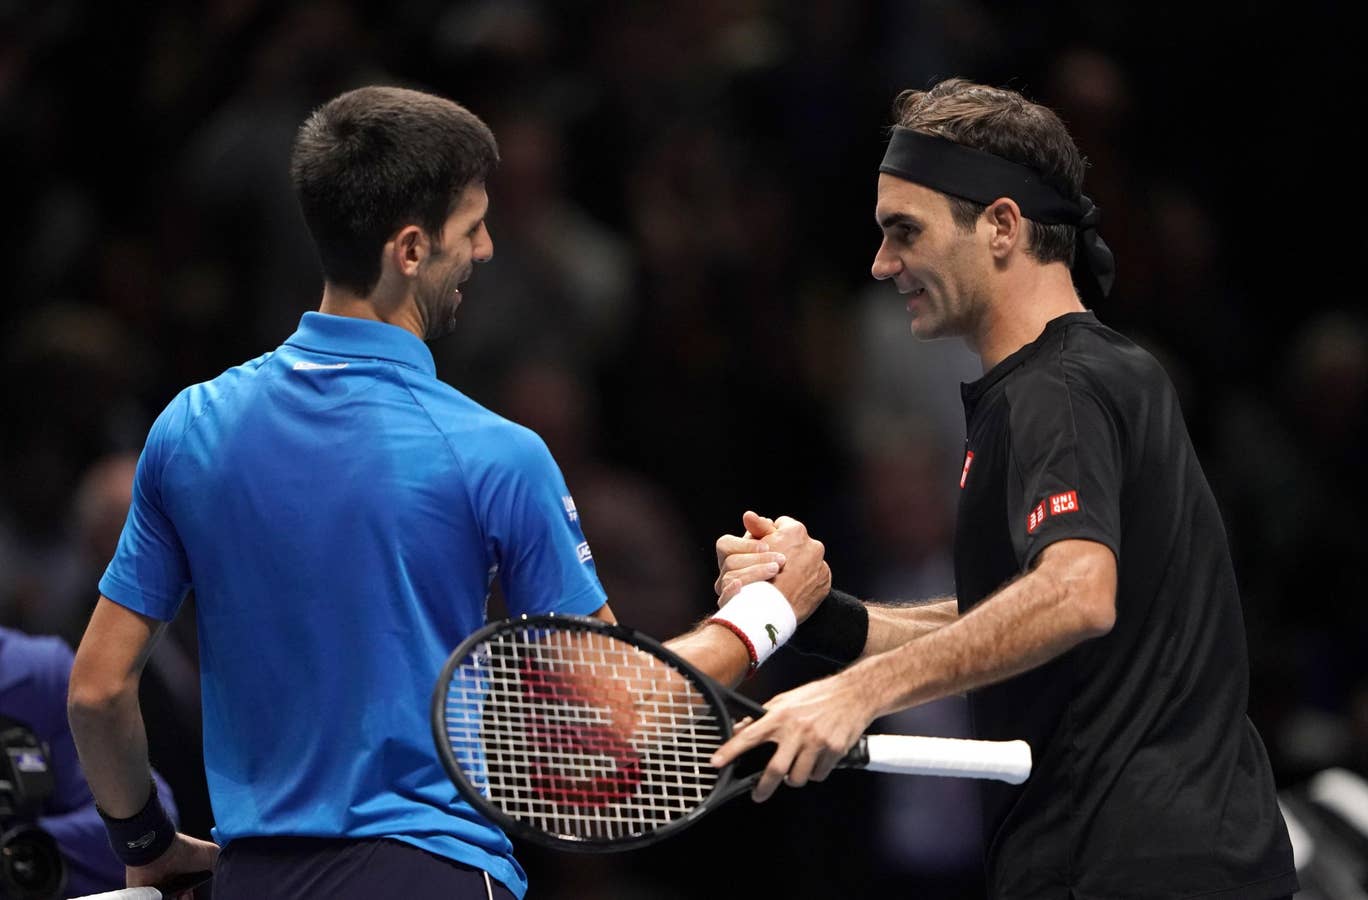 Federer delivers a clinical win over rival Djokovic in ATP finals. Image via PA.